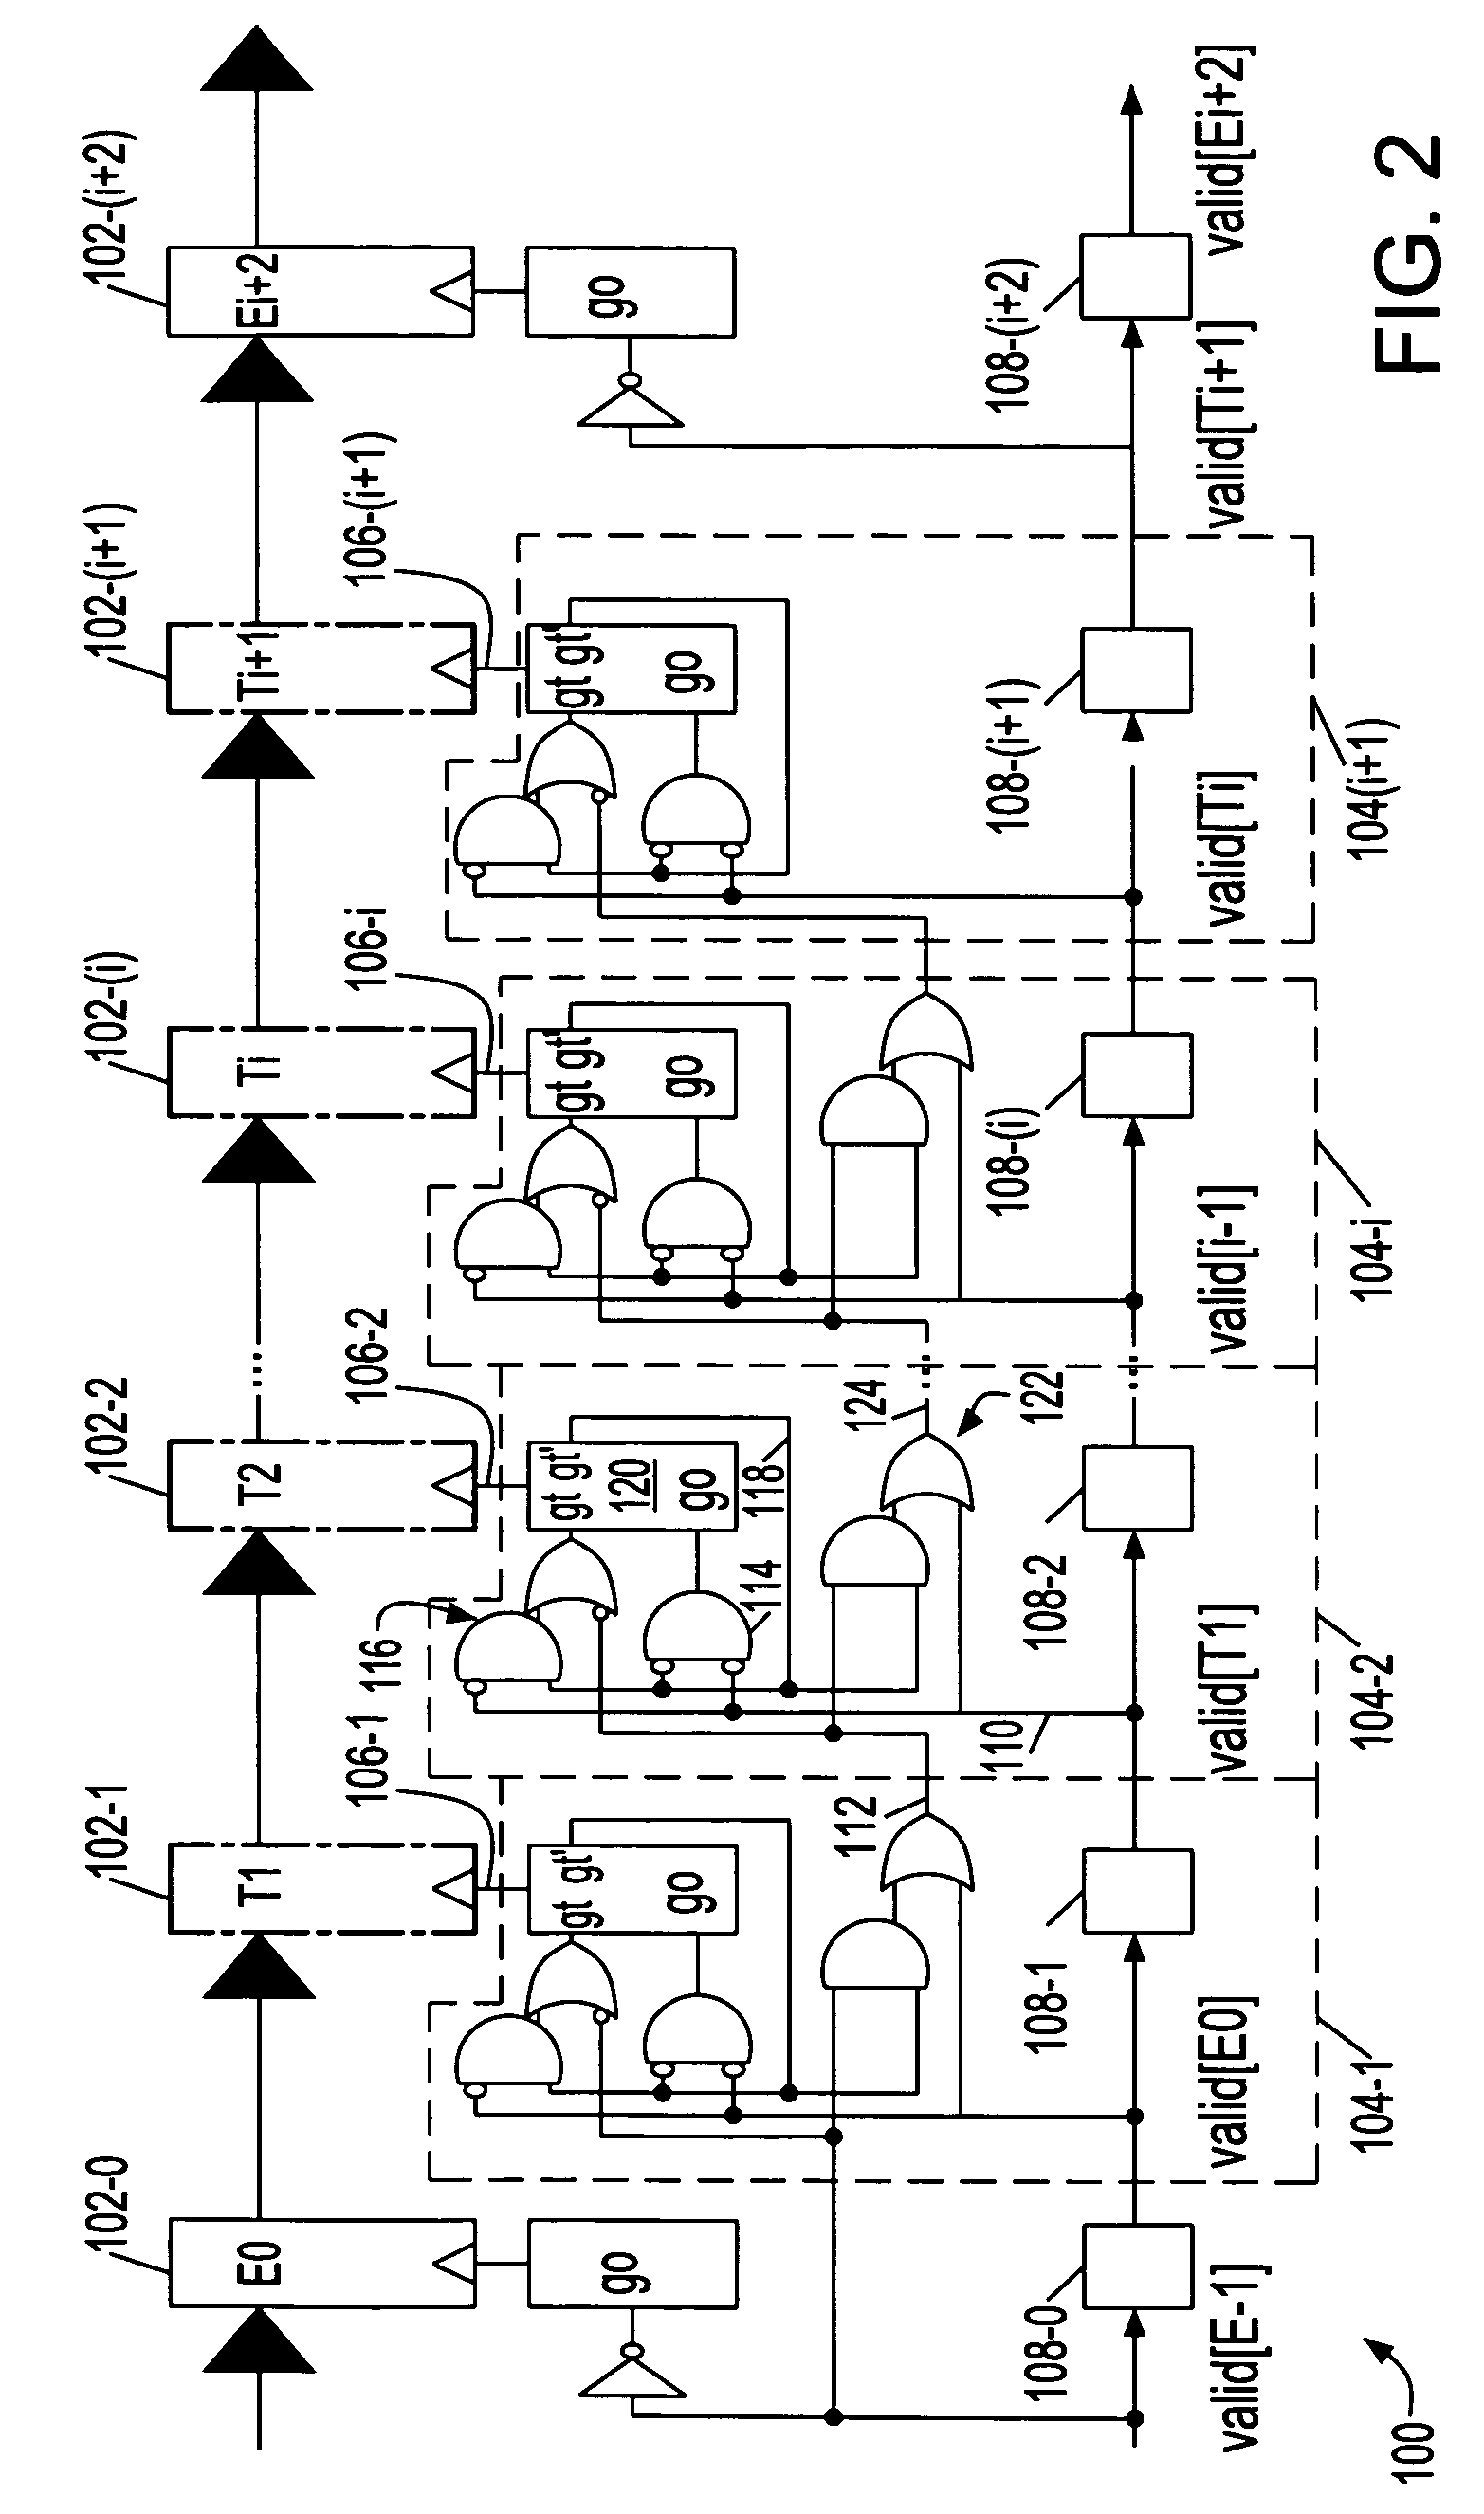 Synchronous pipeline with normally transparent pipeline stages